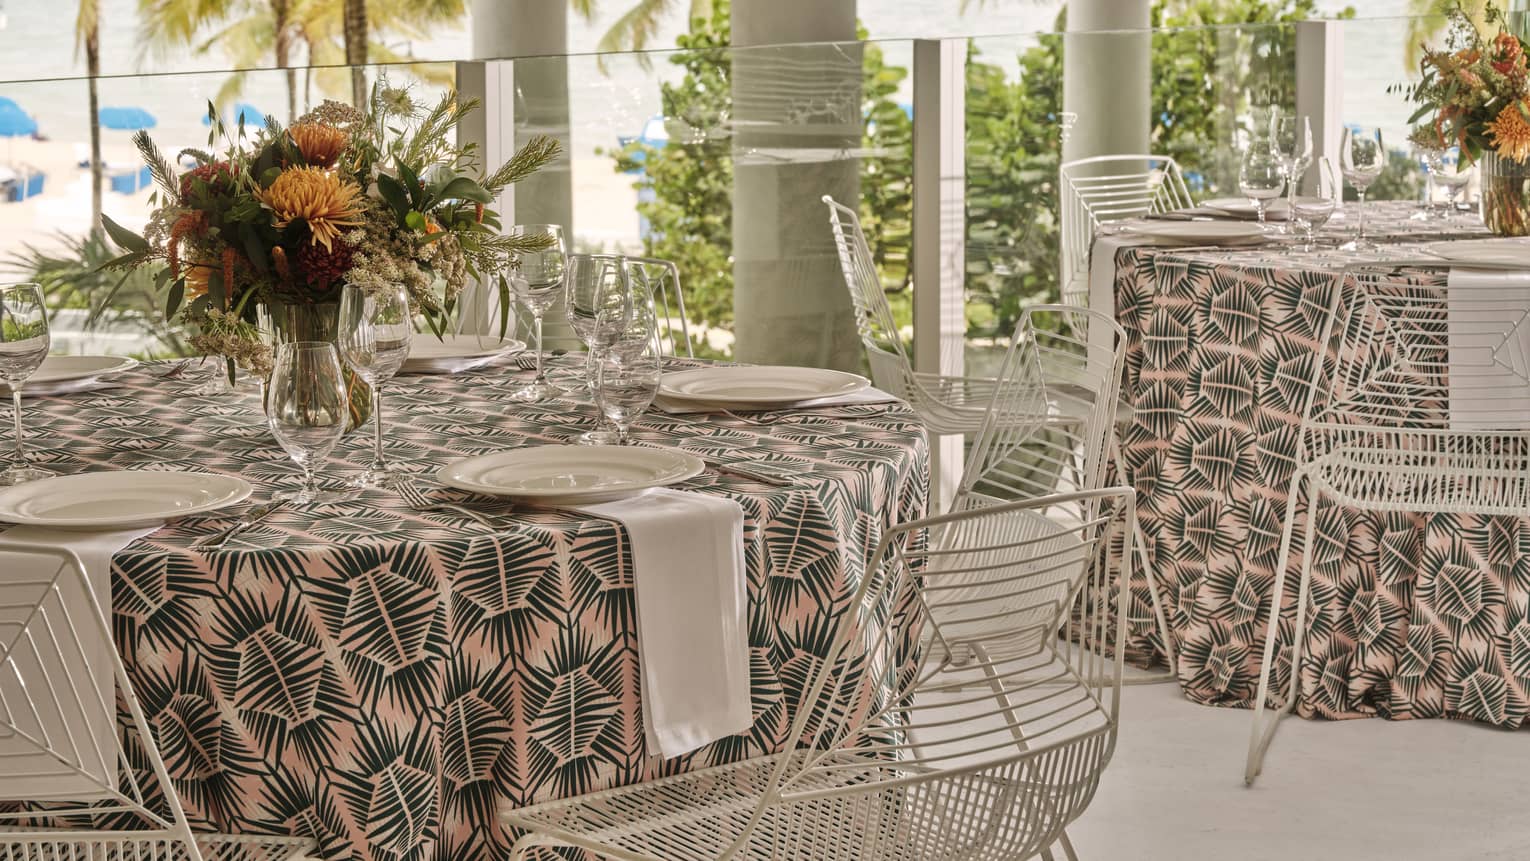 Round tables with table settings outside near a beach with palm trees.